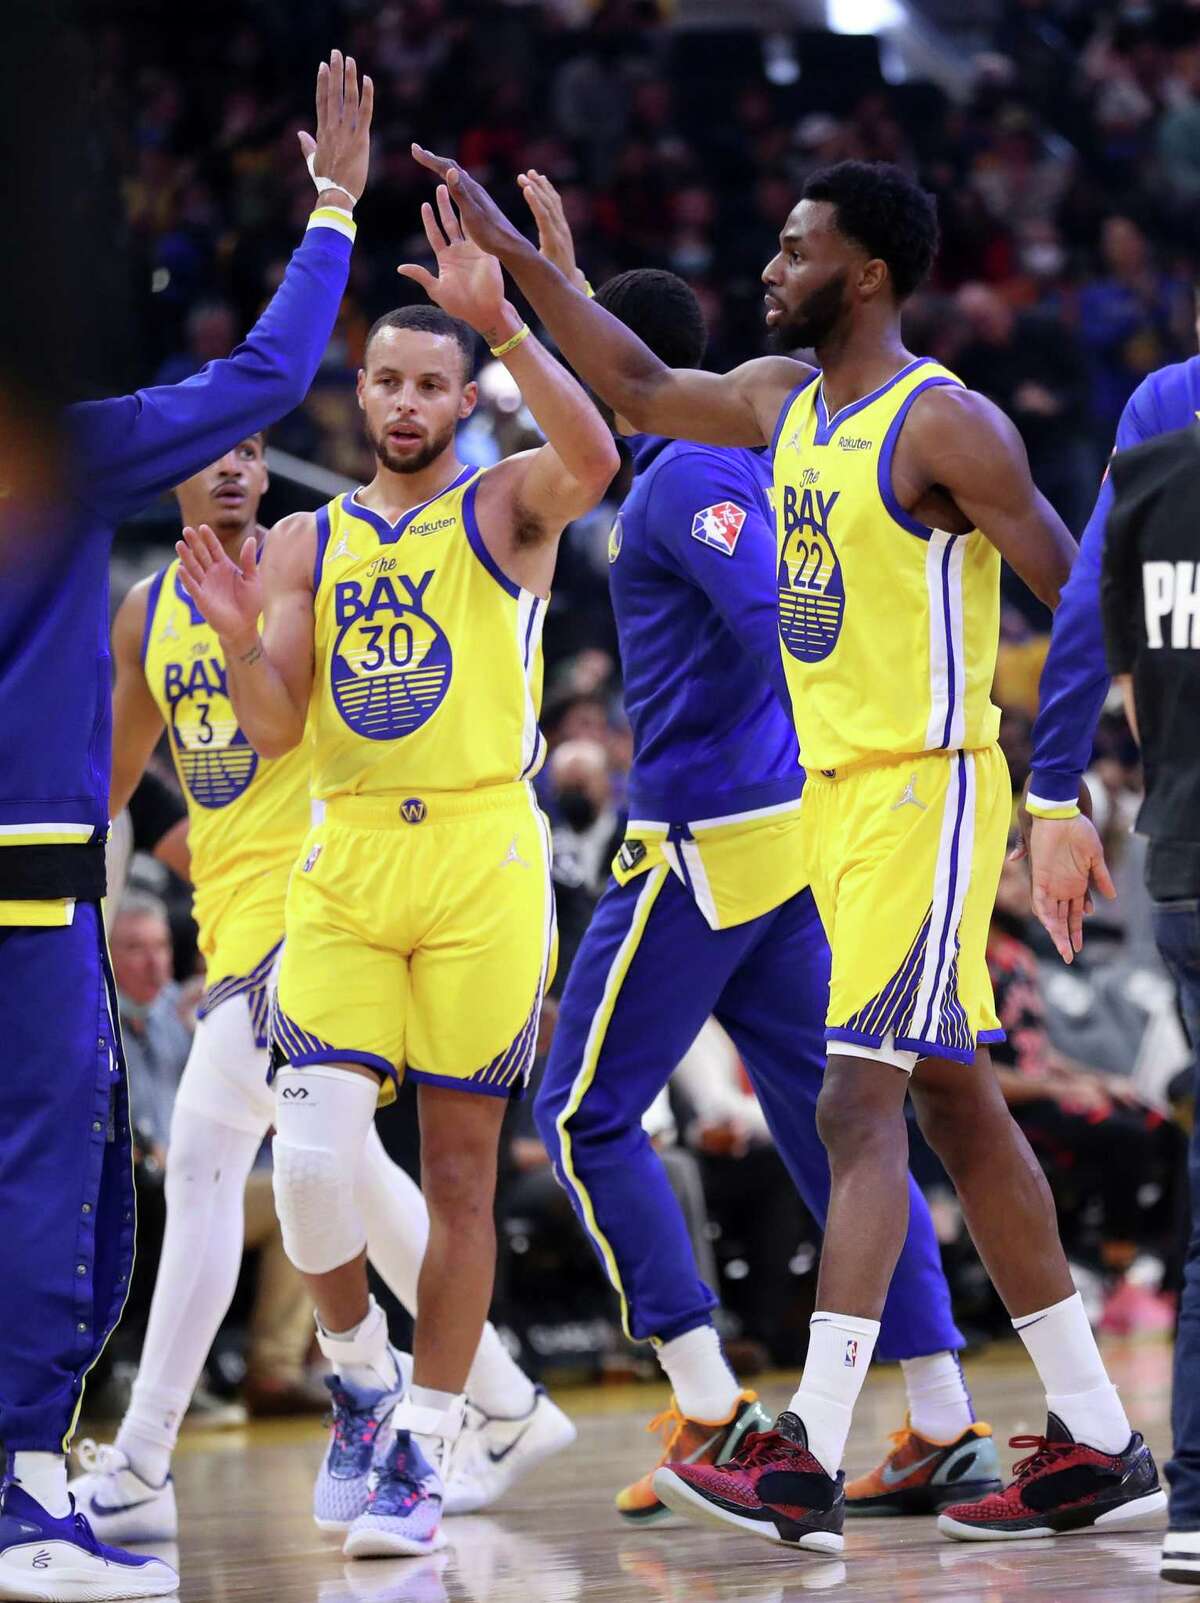 Golden State Warriors' Andrew Wiggins and Stephen Curry get high fives in 1st quarter against Toronto Raptors during NBA game at Chase Center in San Francisco, Calif., on Sunday, November 21, 2021.